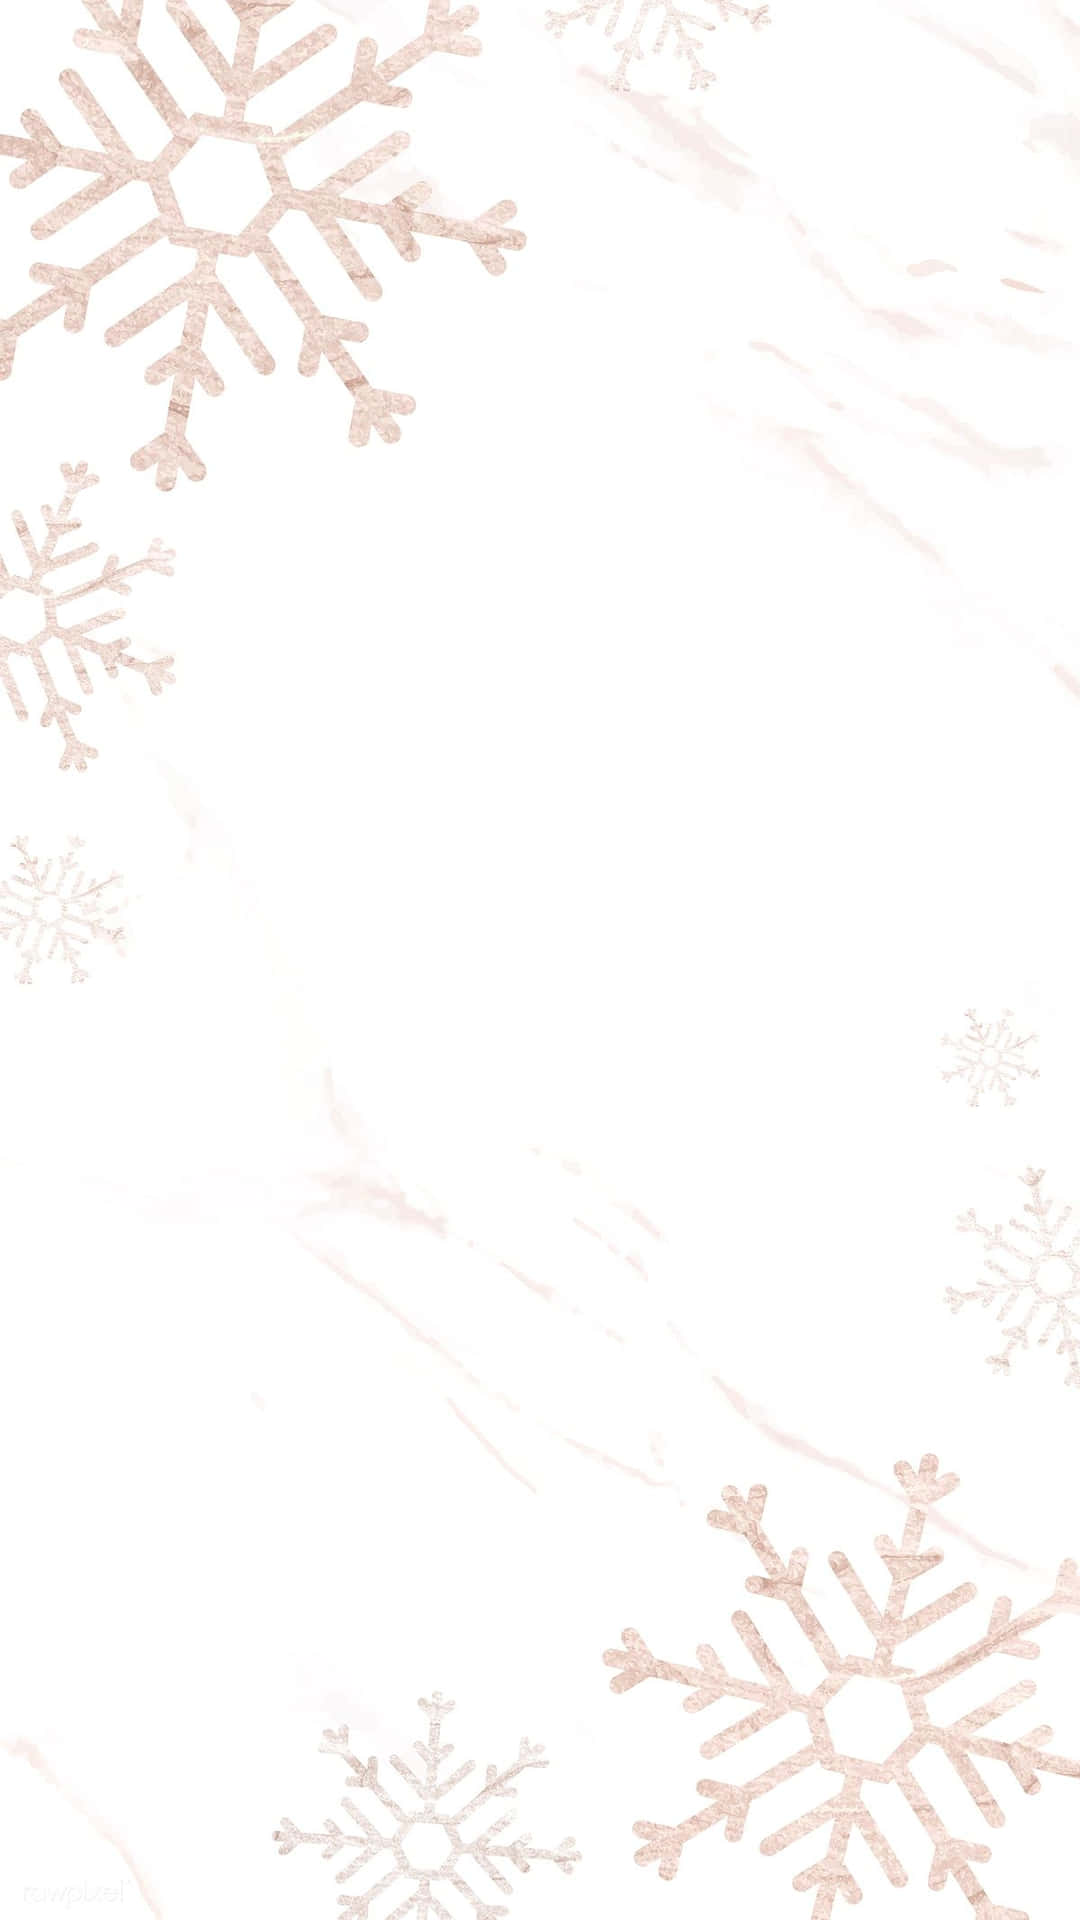 A snowflake background with white and pink - White Christmas, snowflake, vector